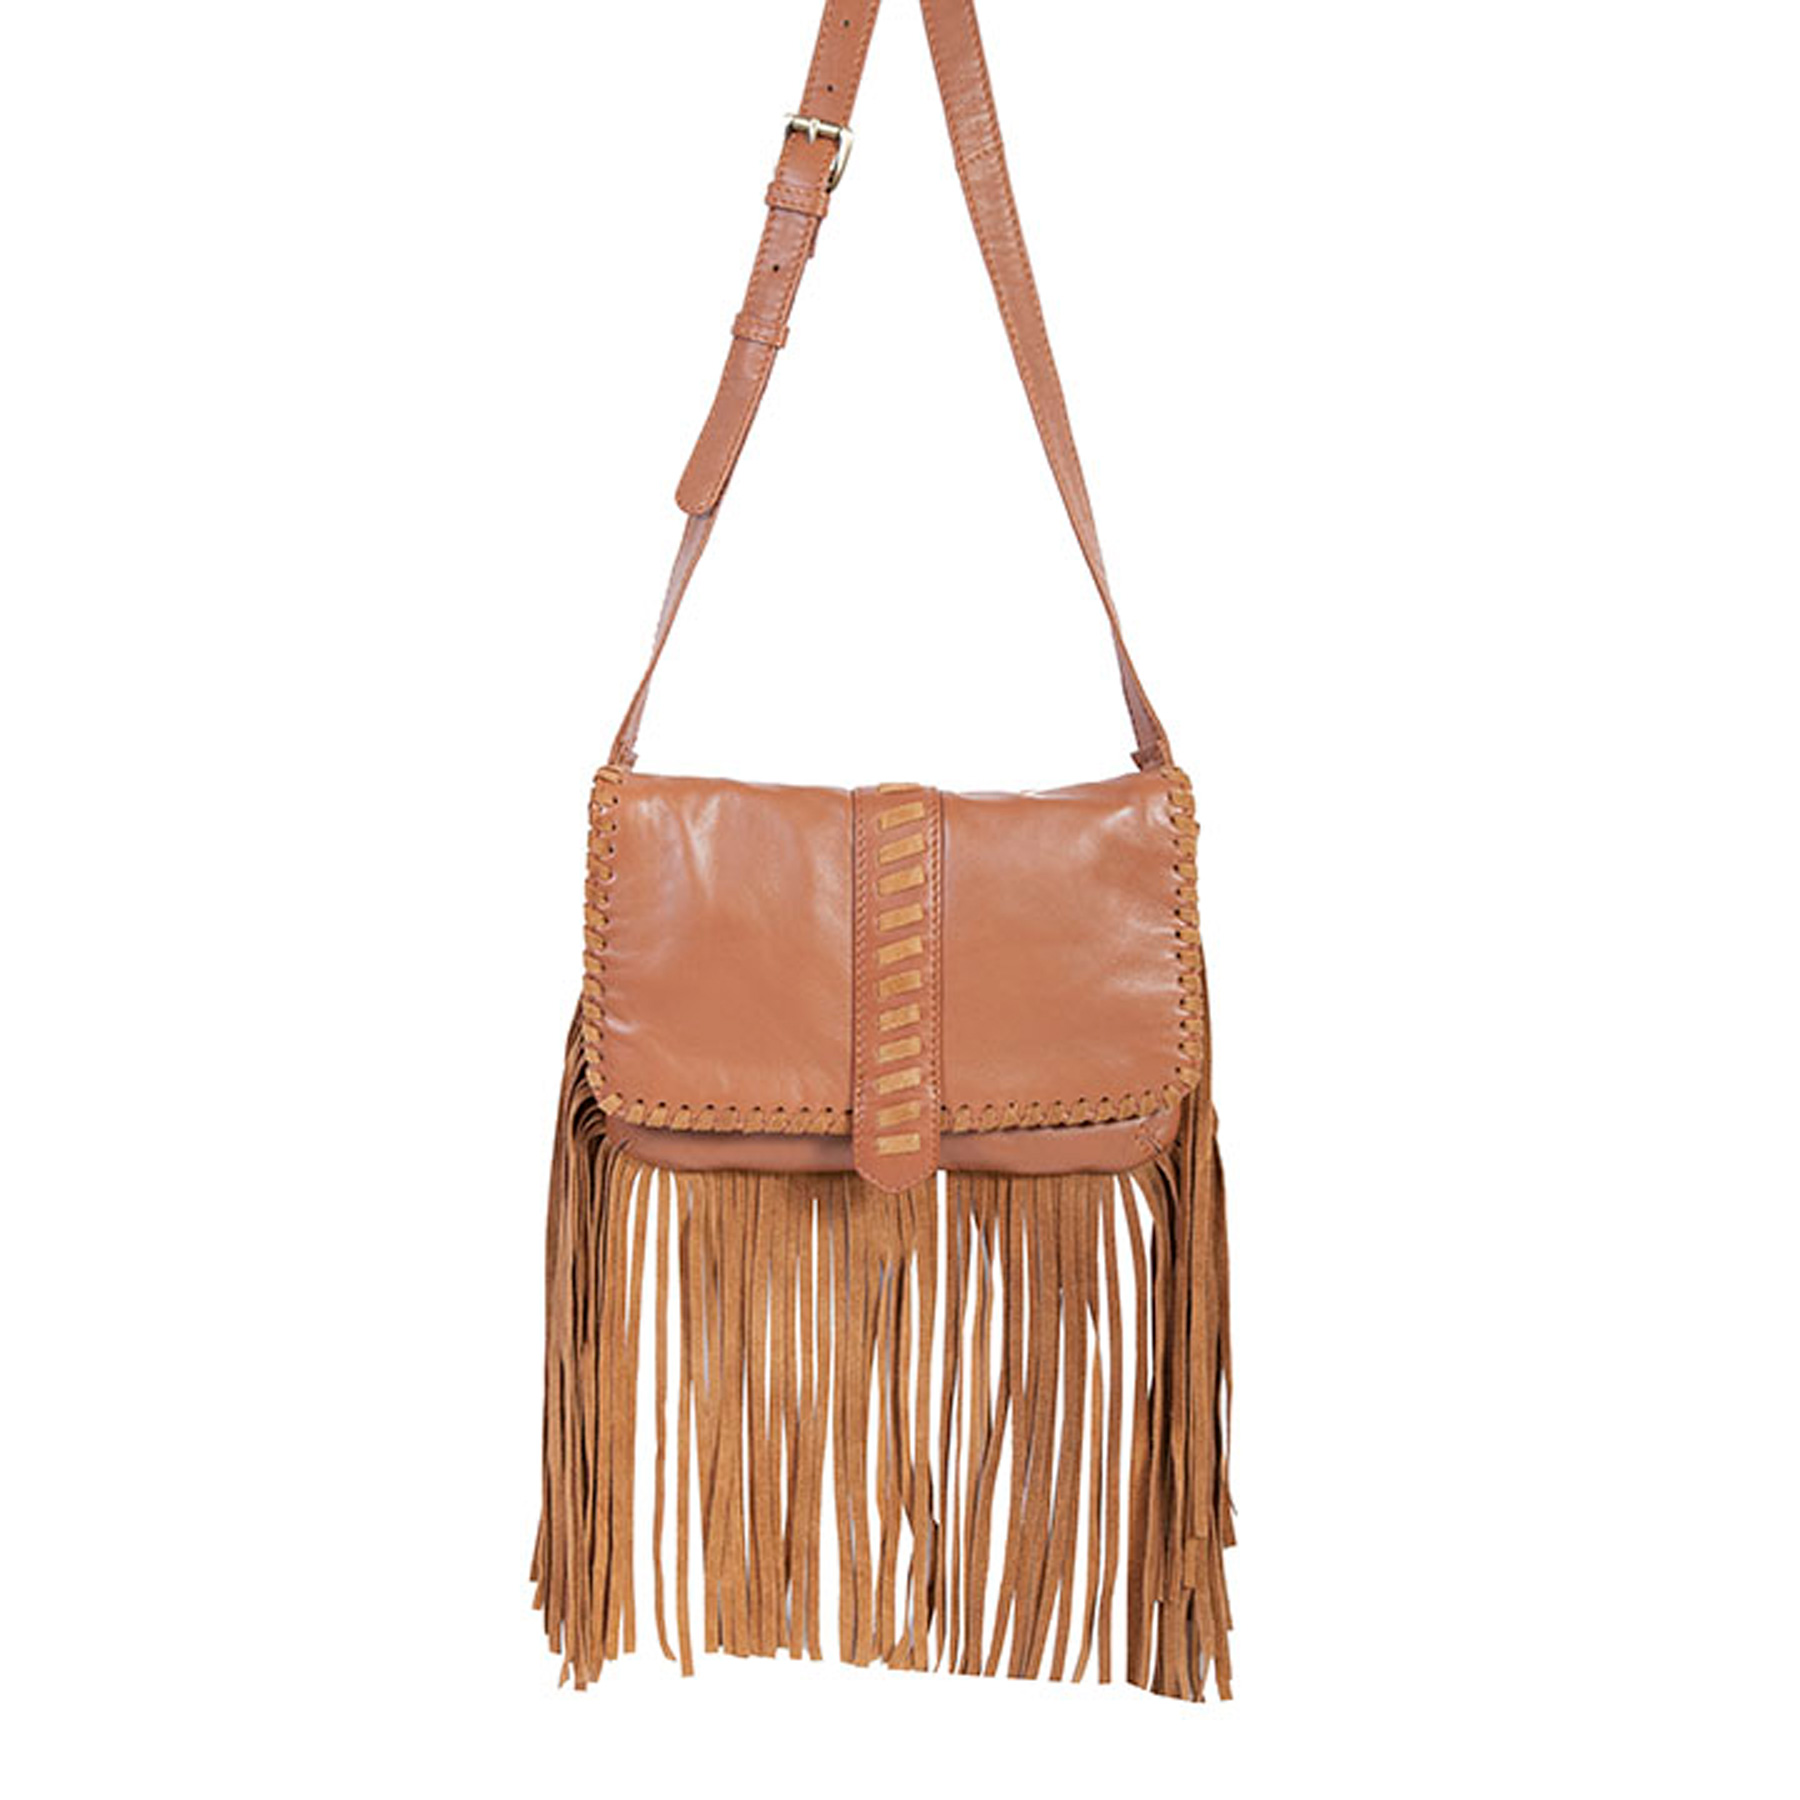 Pungo Ridge - Scully Leather & Suede Trim Handbag - Tan, Scully ...